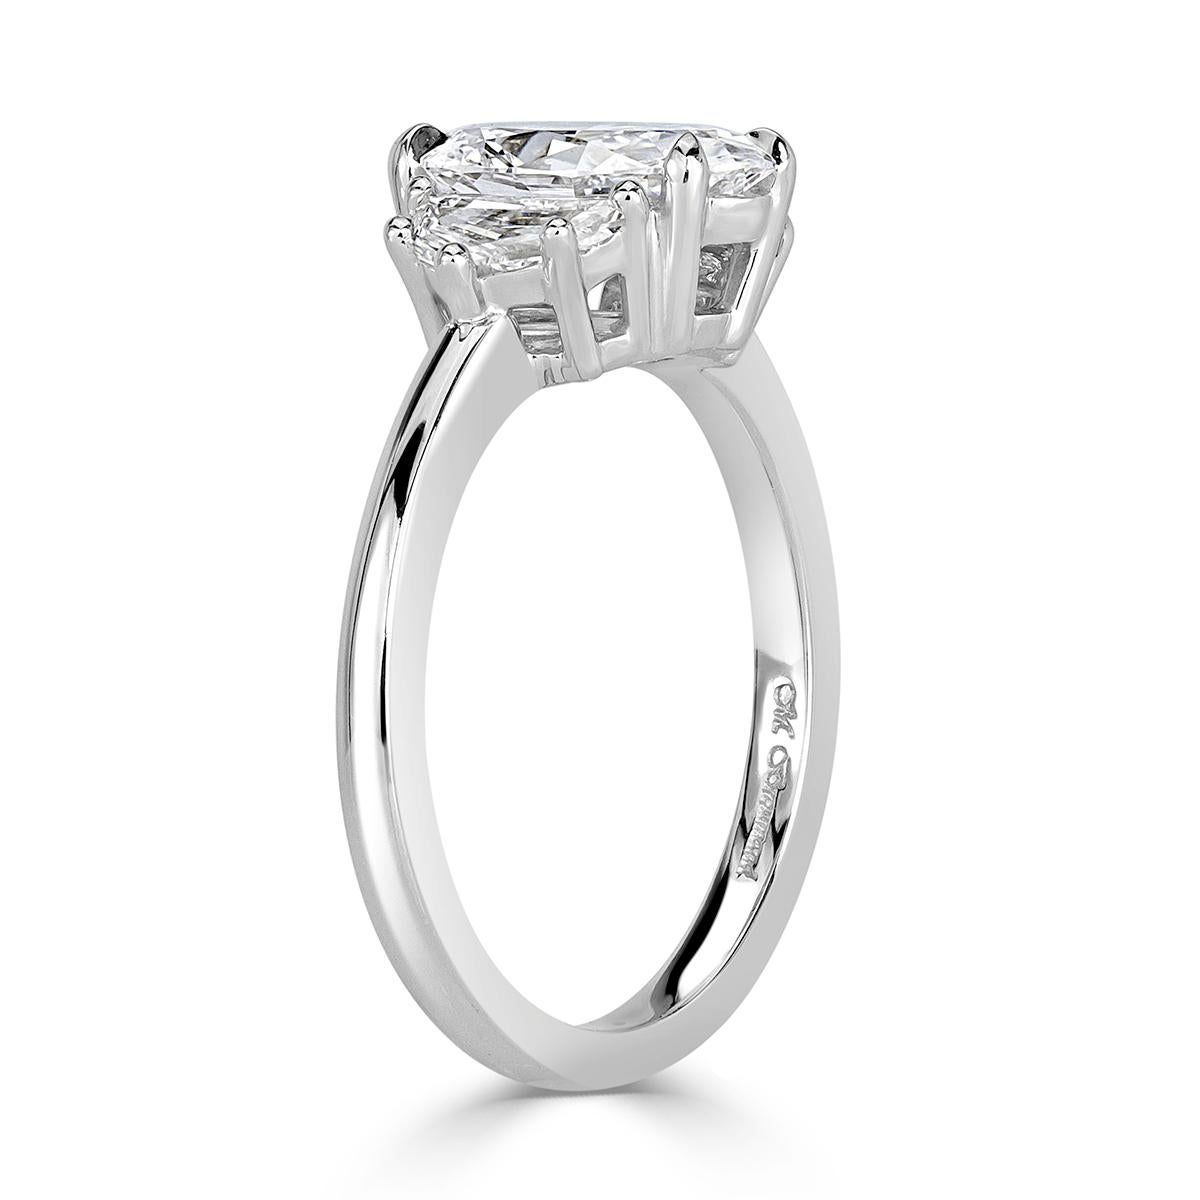 This unique, three-stone oval cut diamond engagement ring features a gorgeous 1.61ct oval cut center diamond, GIA certified at D-VVS2. It has amazing measurements of 10.47 x 6.49 mm which means it is very elongated and looks much larger than its